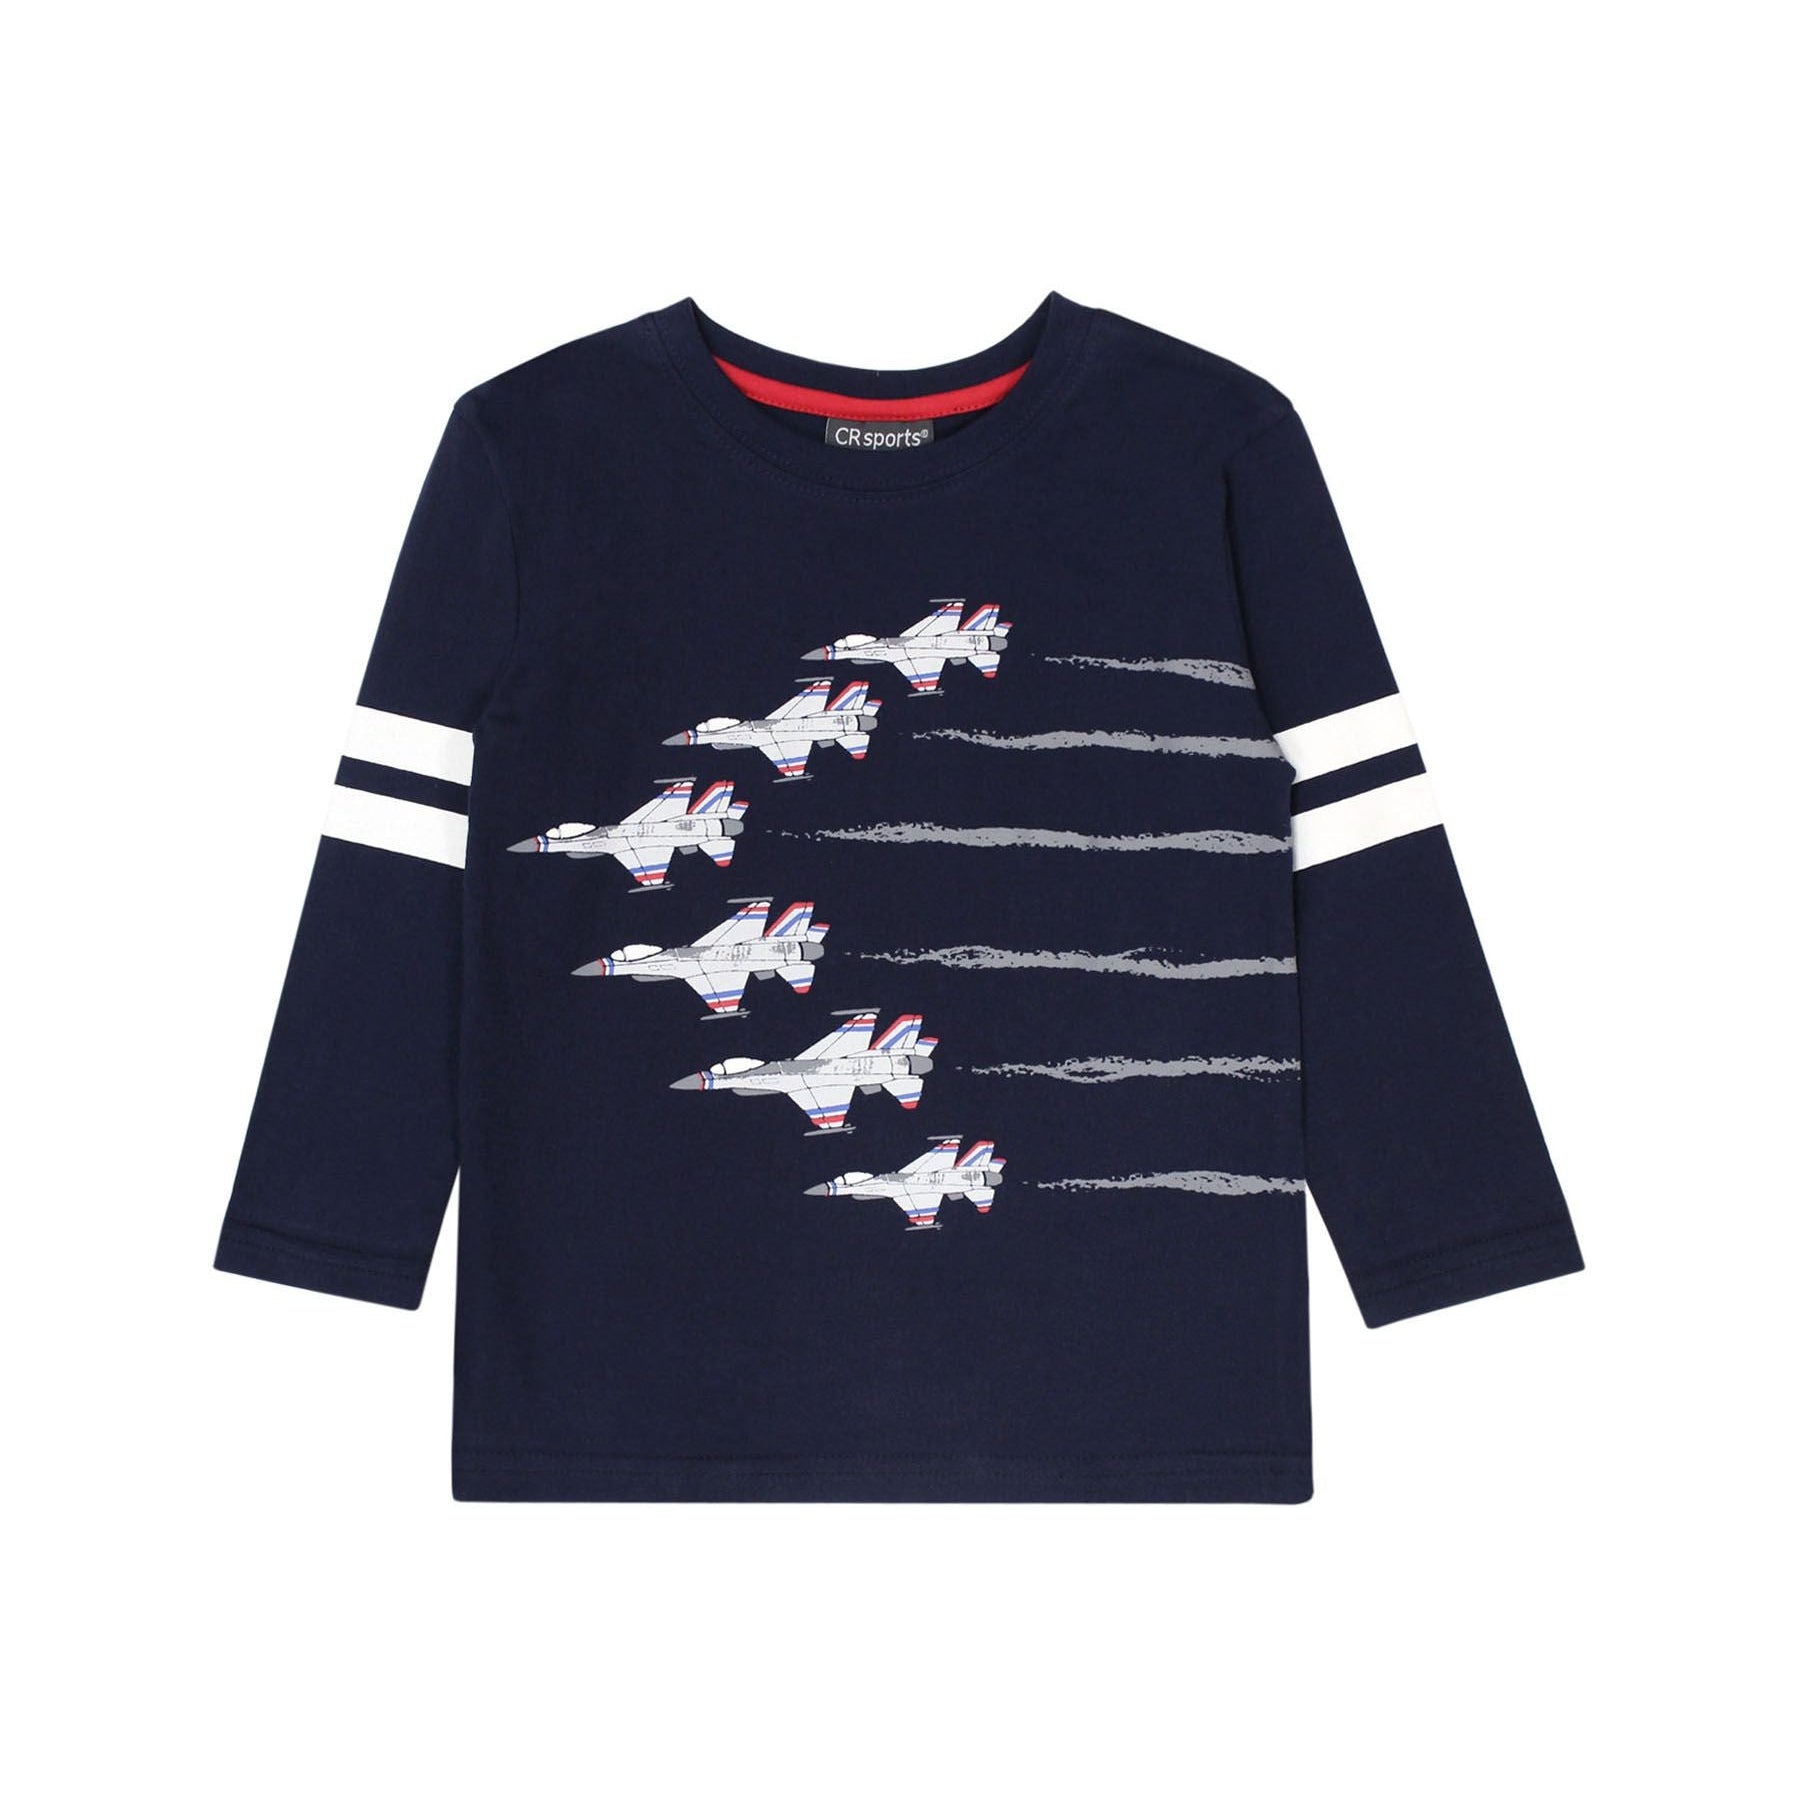 CR Sports Air Show Navy Top with Stripe Sleeve-CR SPORTS-Little Giant Kidz